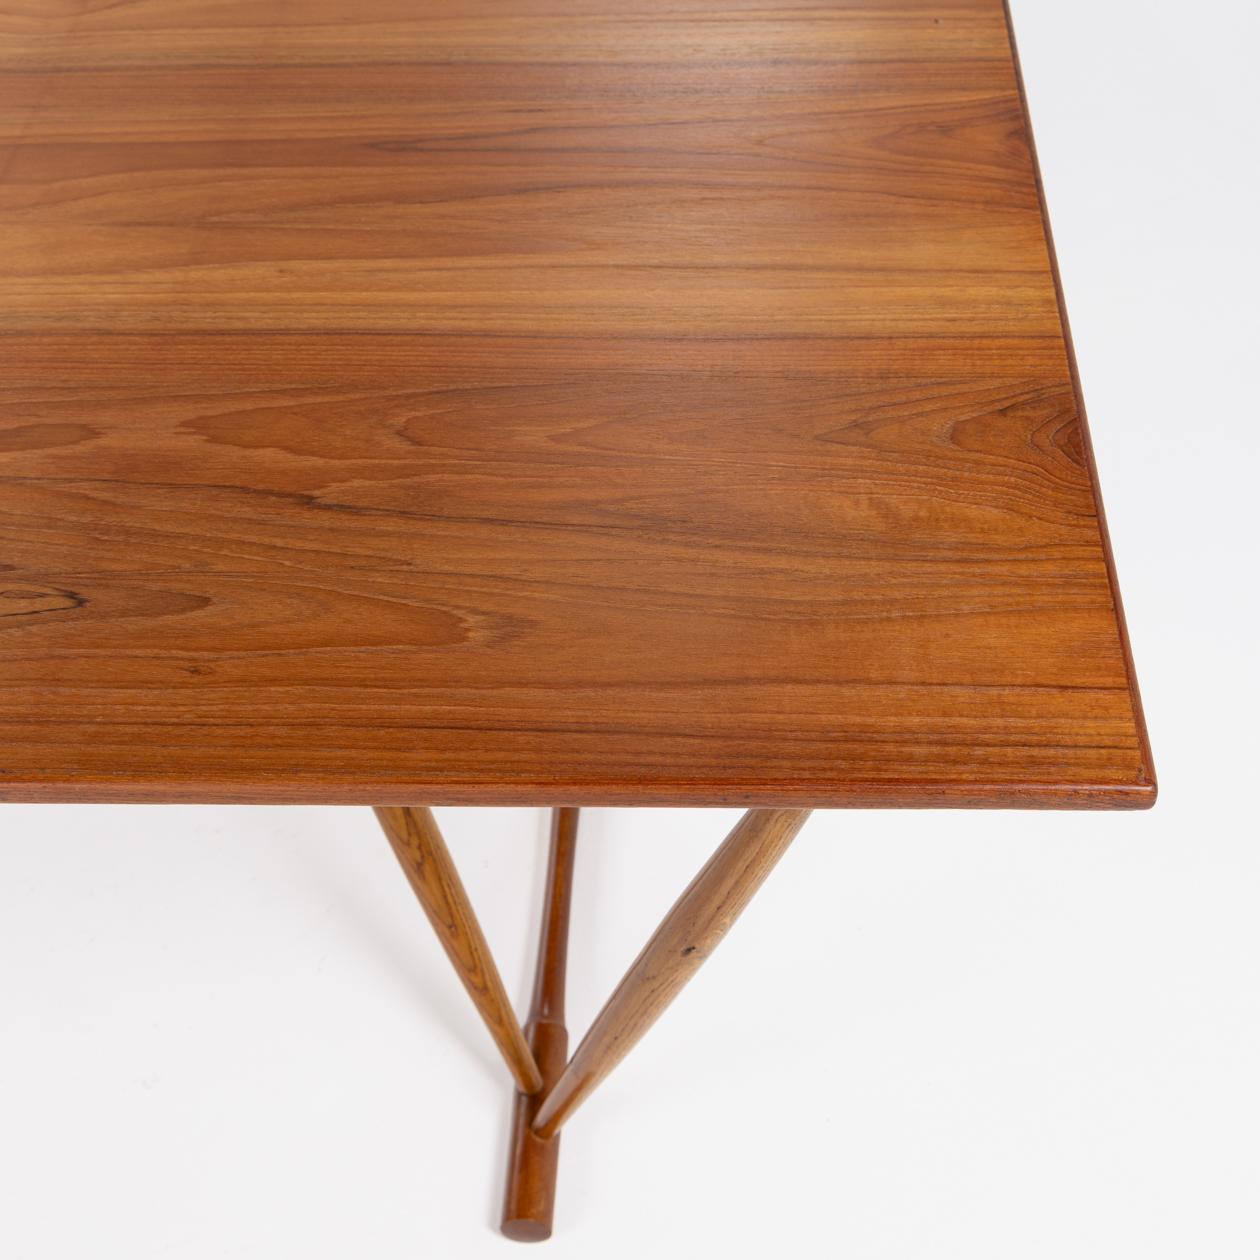 Sculptural work/dining table by Frode Holm In Good Condition For Sale In Copenhagen, DK